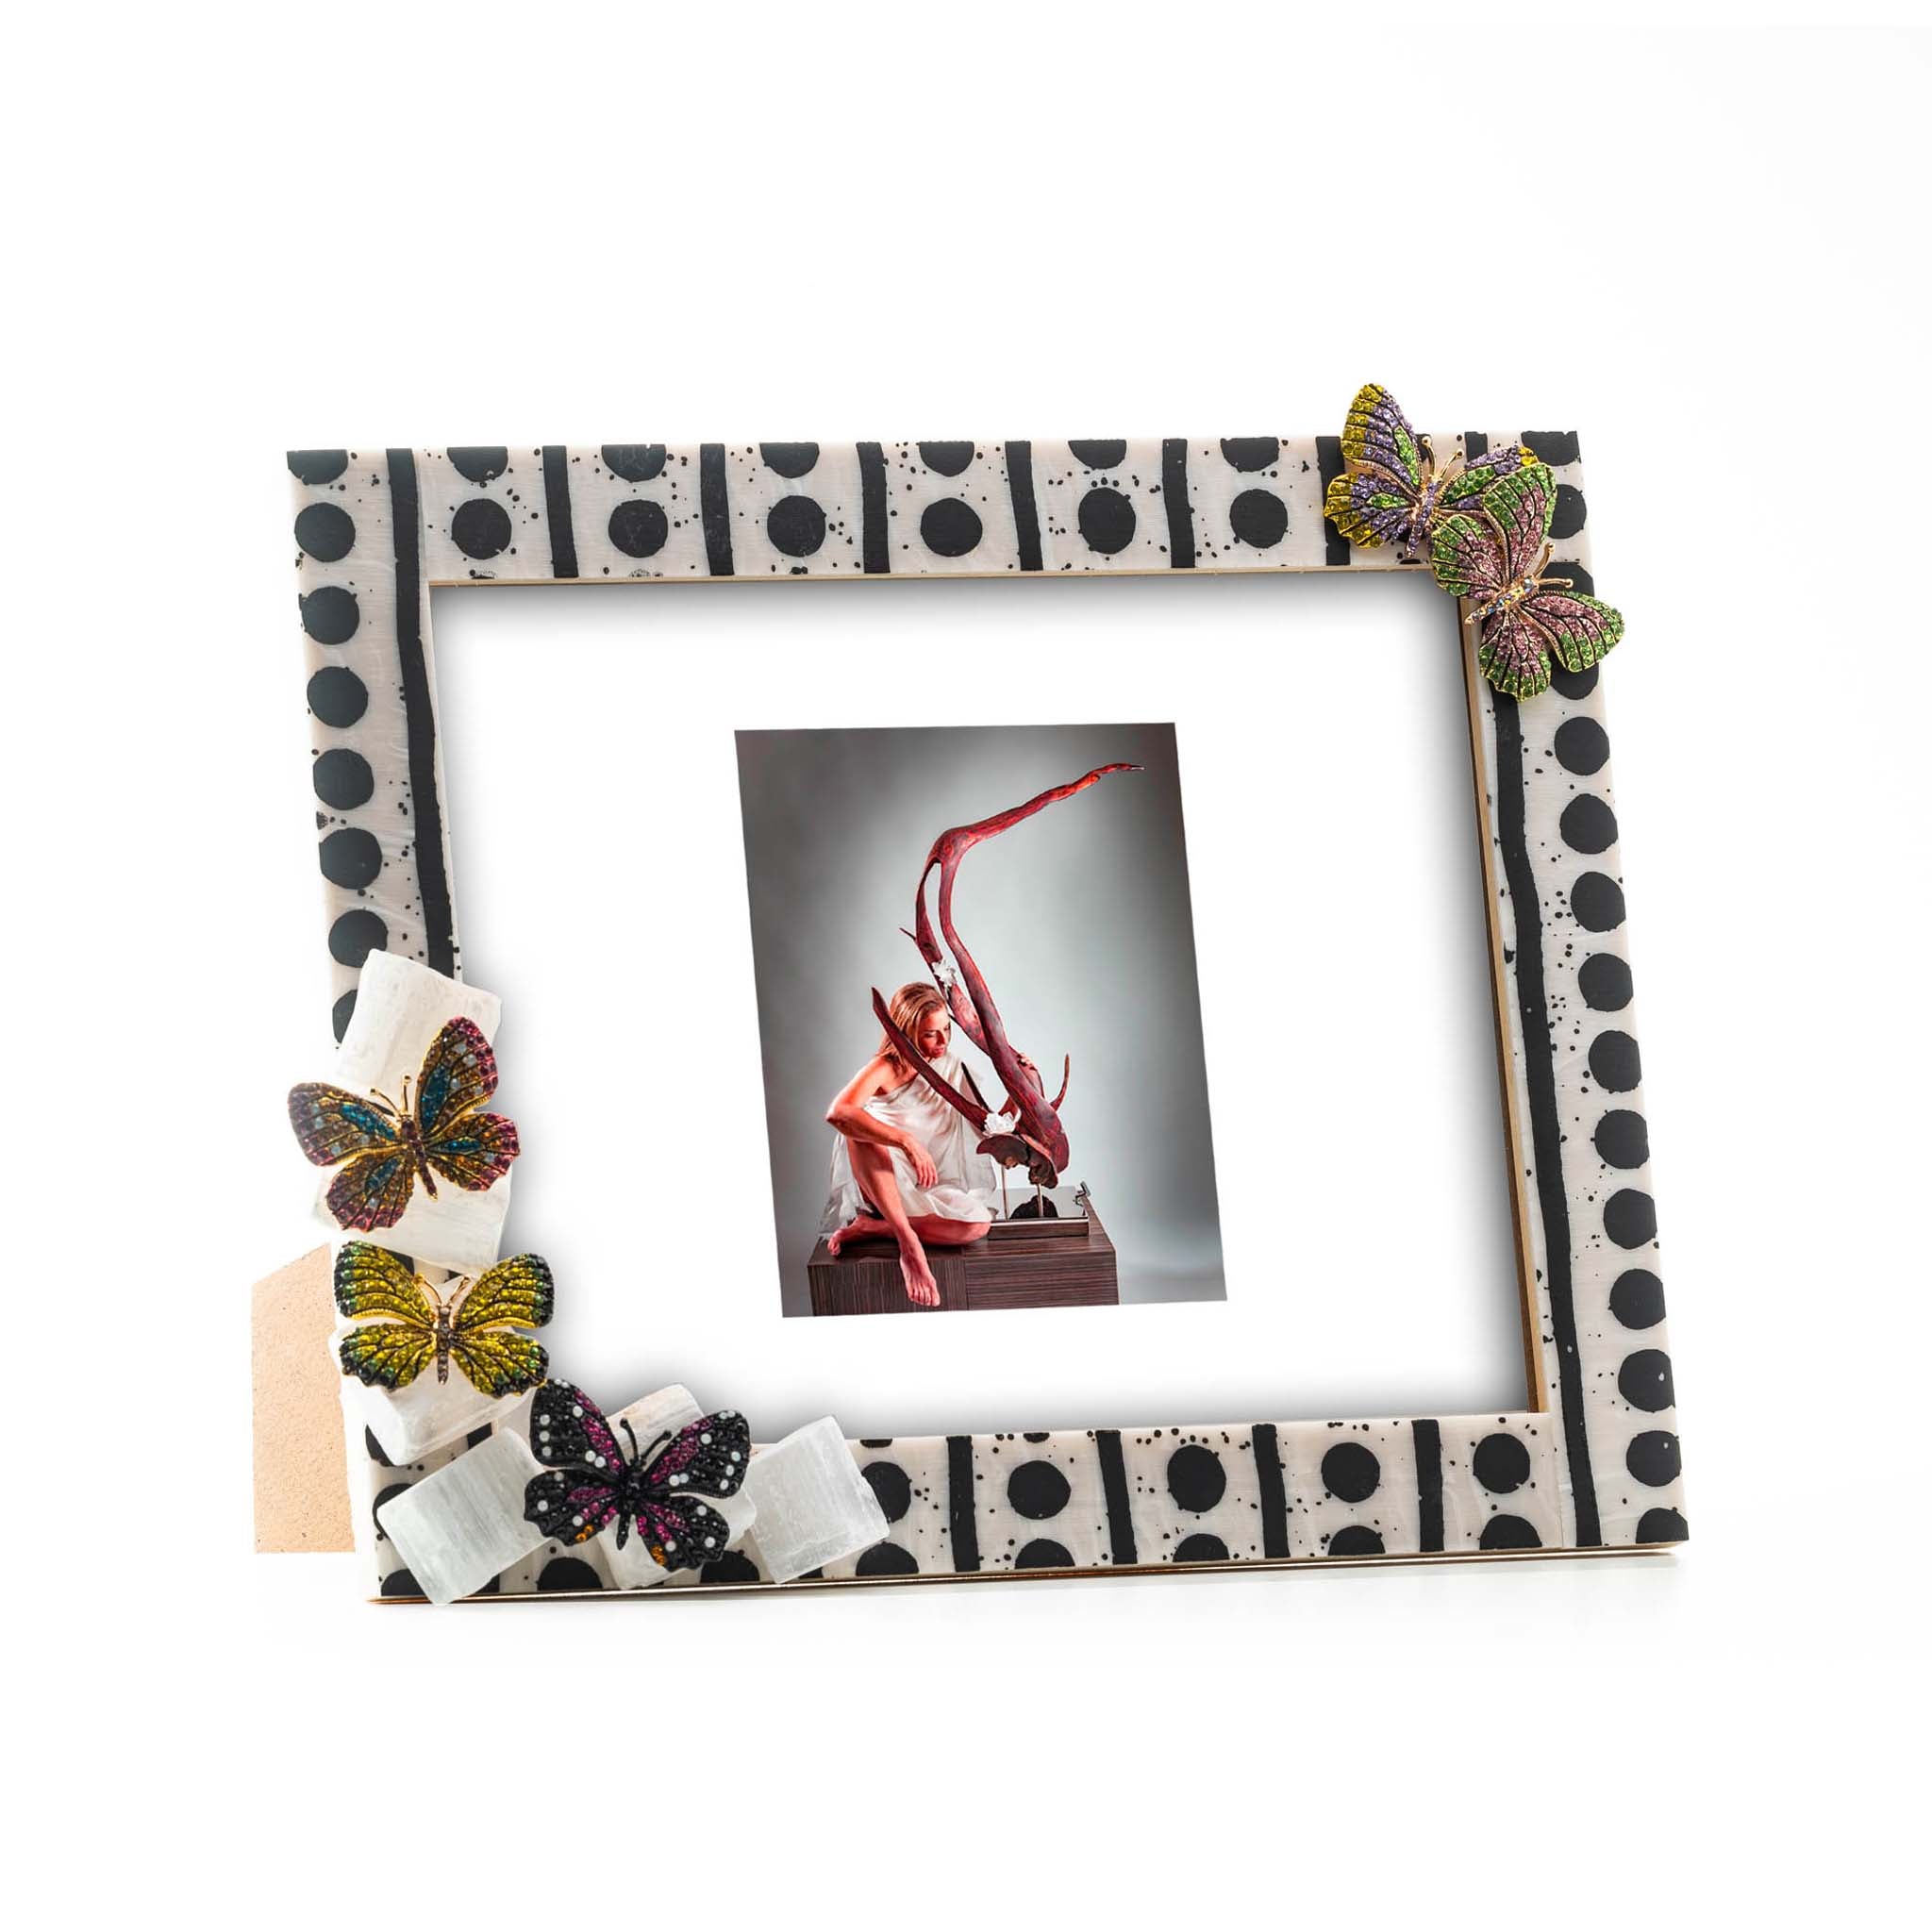 Selenite Polkadot with Colorful Butterflies Frame